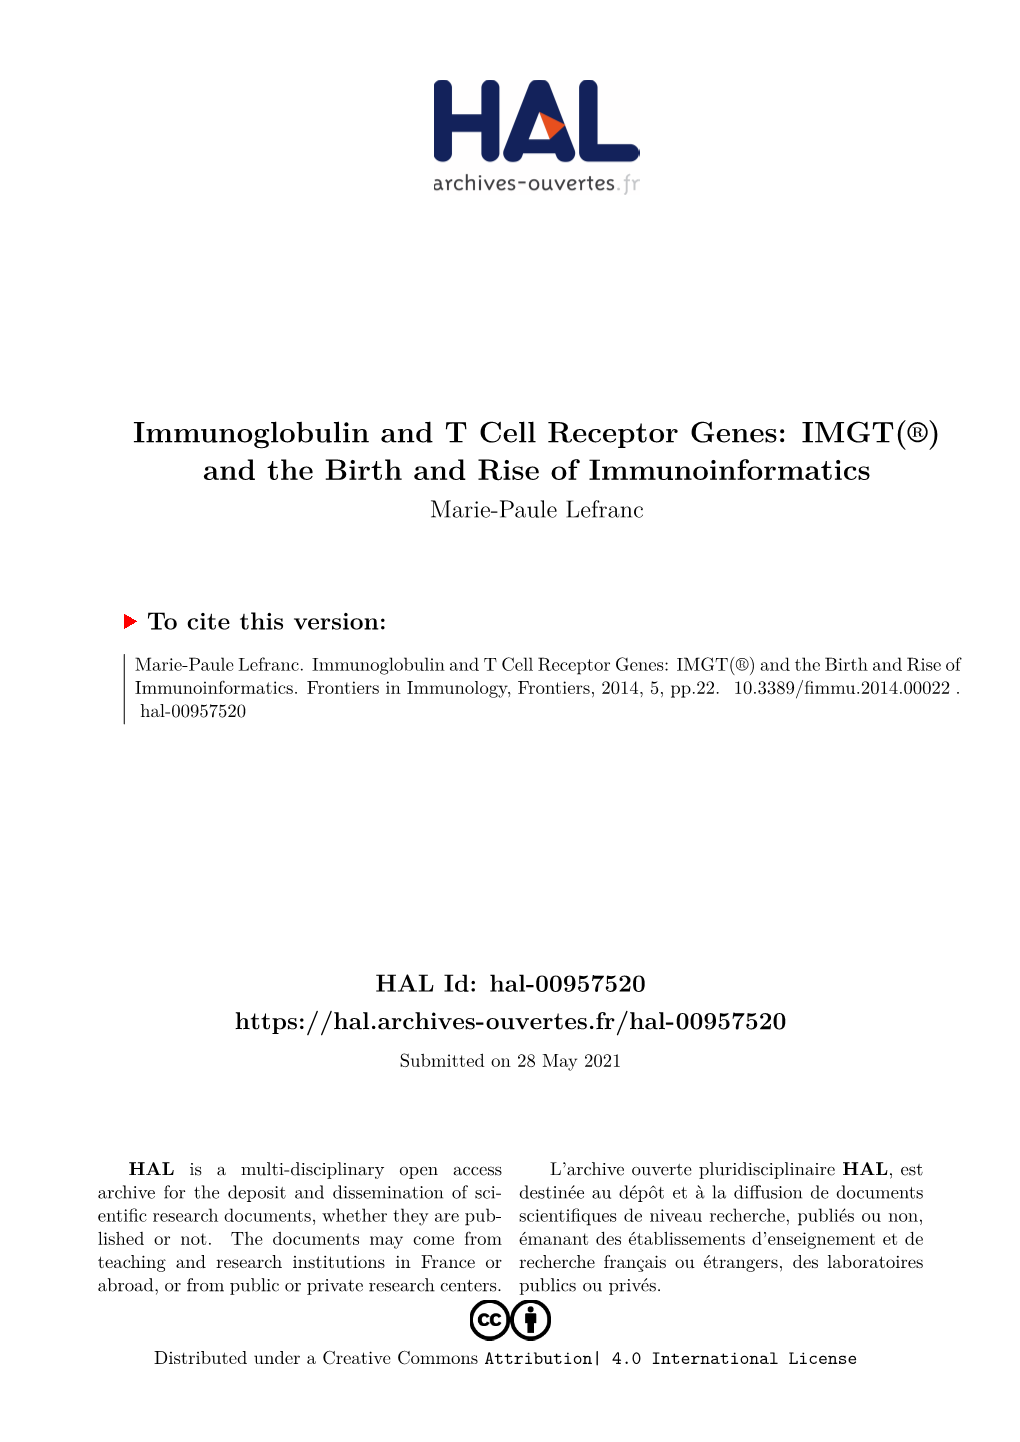 Immunoglobulin and T Cell Receptor Genes: IMGT(®) and the Birth and Rise of Immunoinformatics Marie-Paule Lefranc